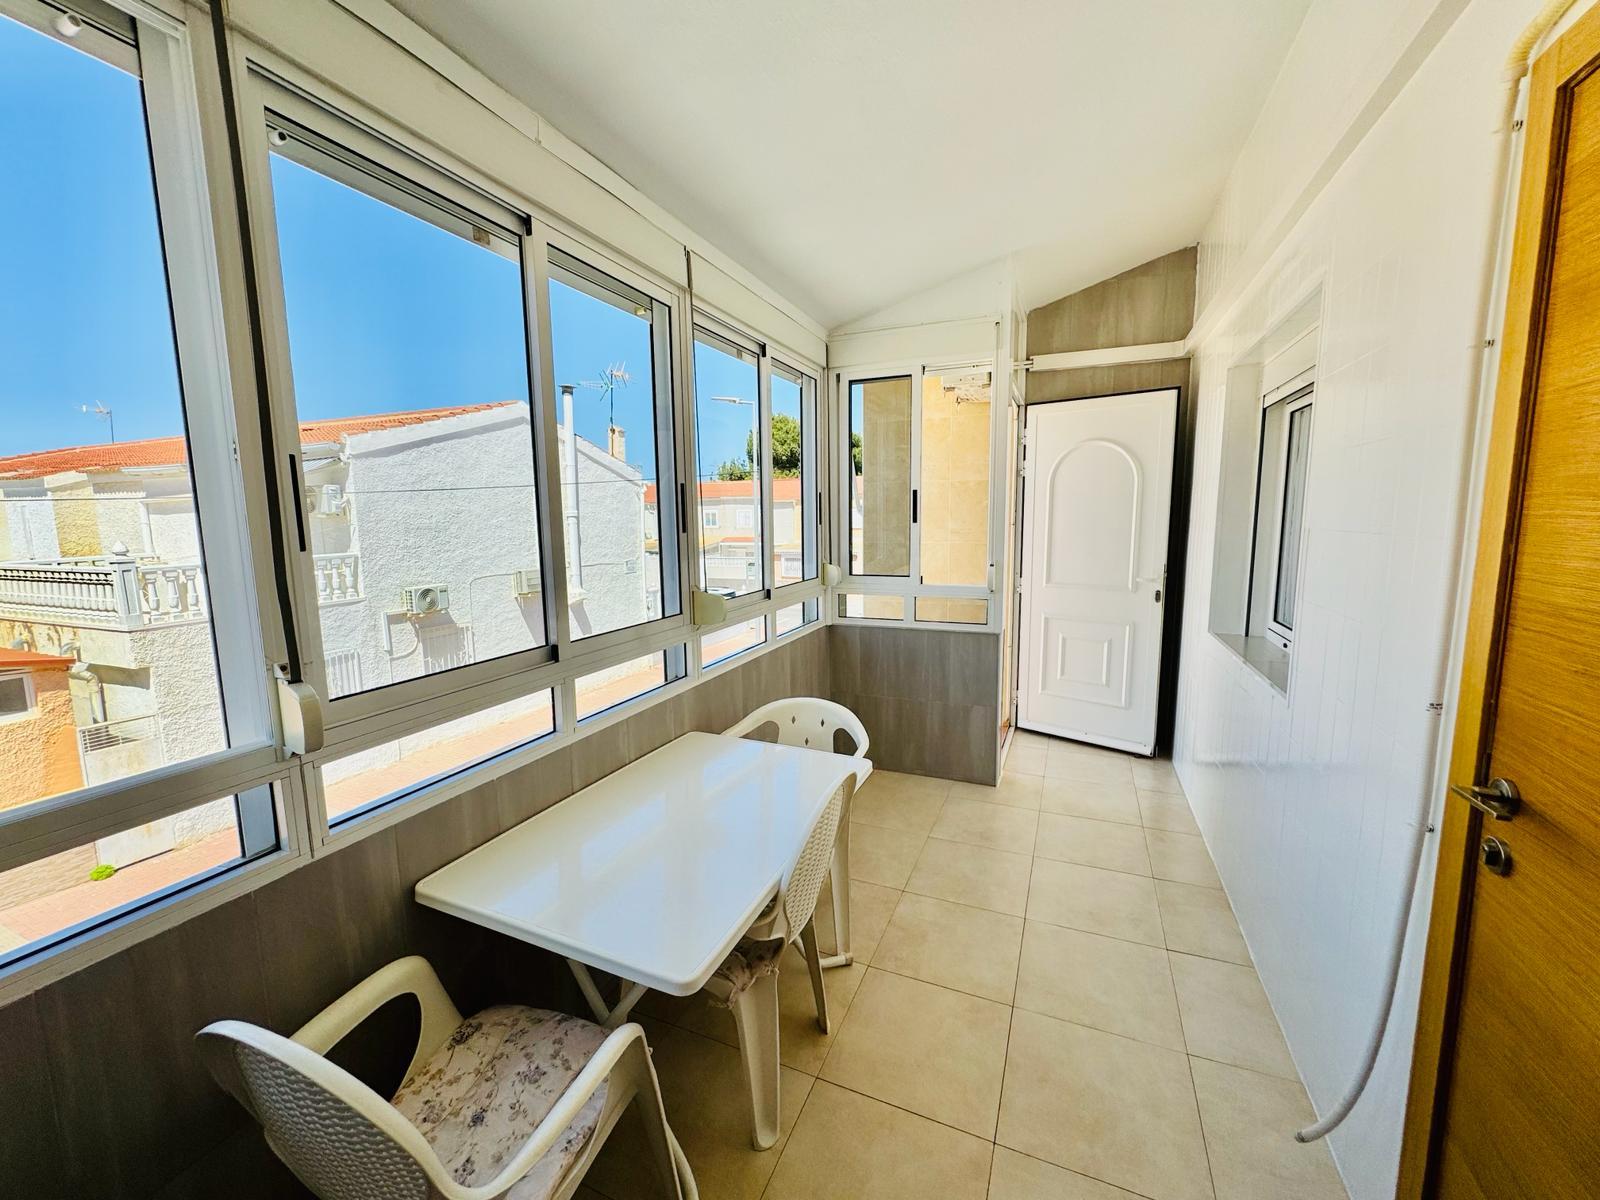 1 Soverom bungalow in Torrevieja bungalow Torrevieja